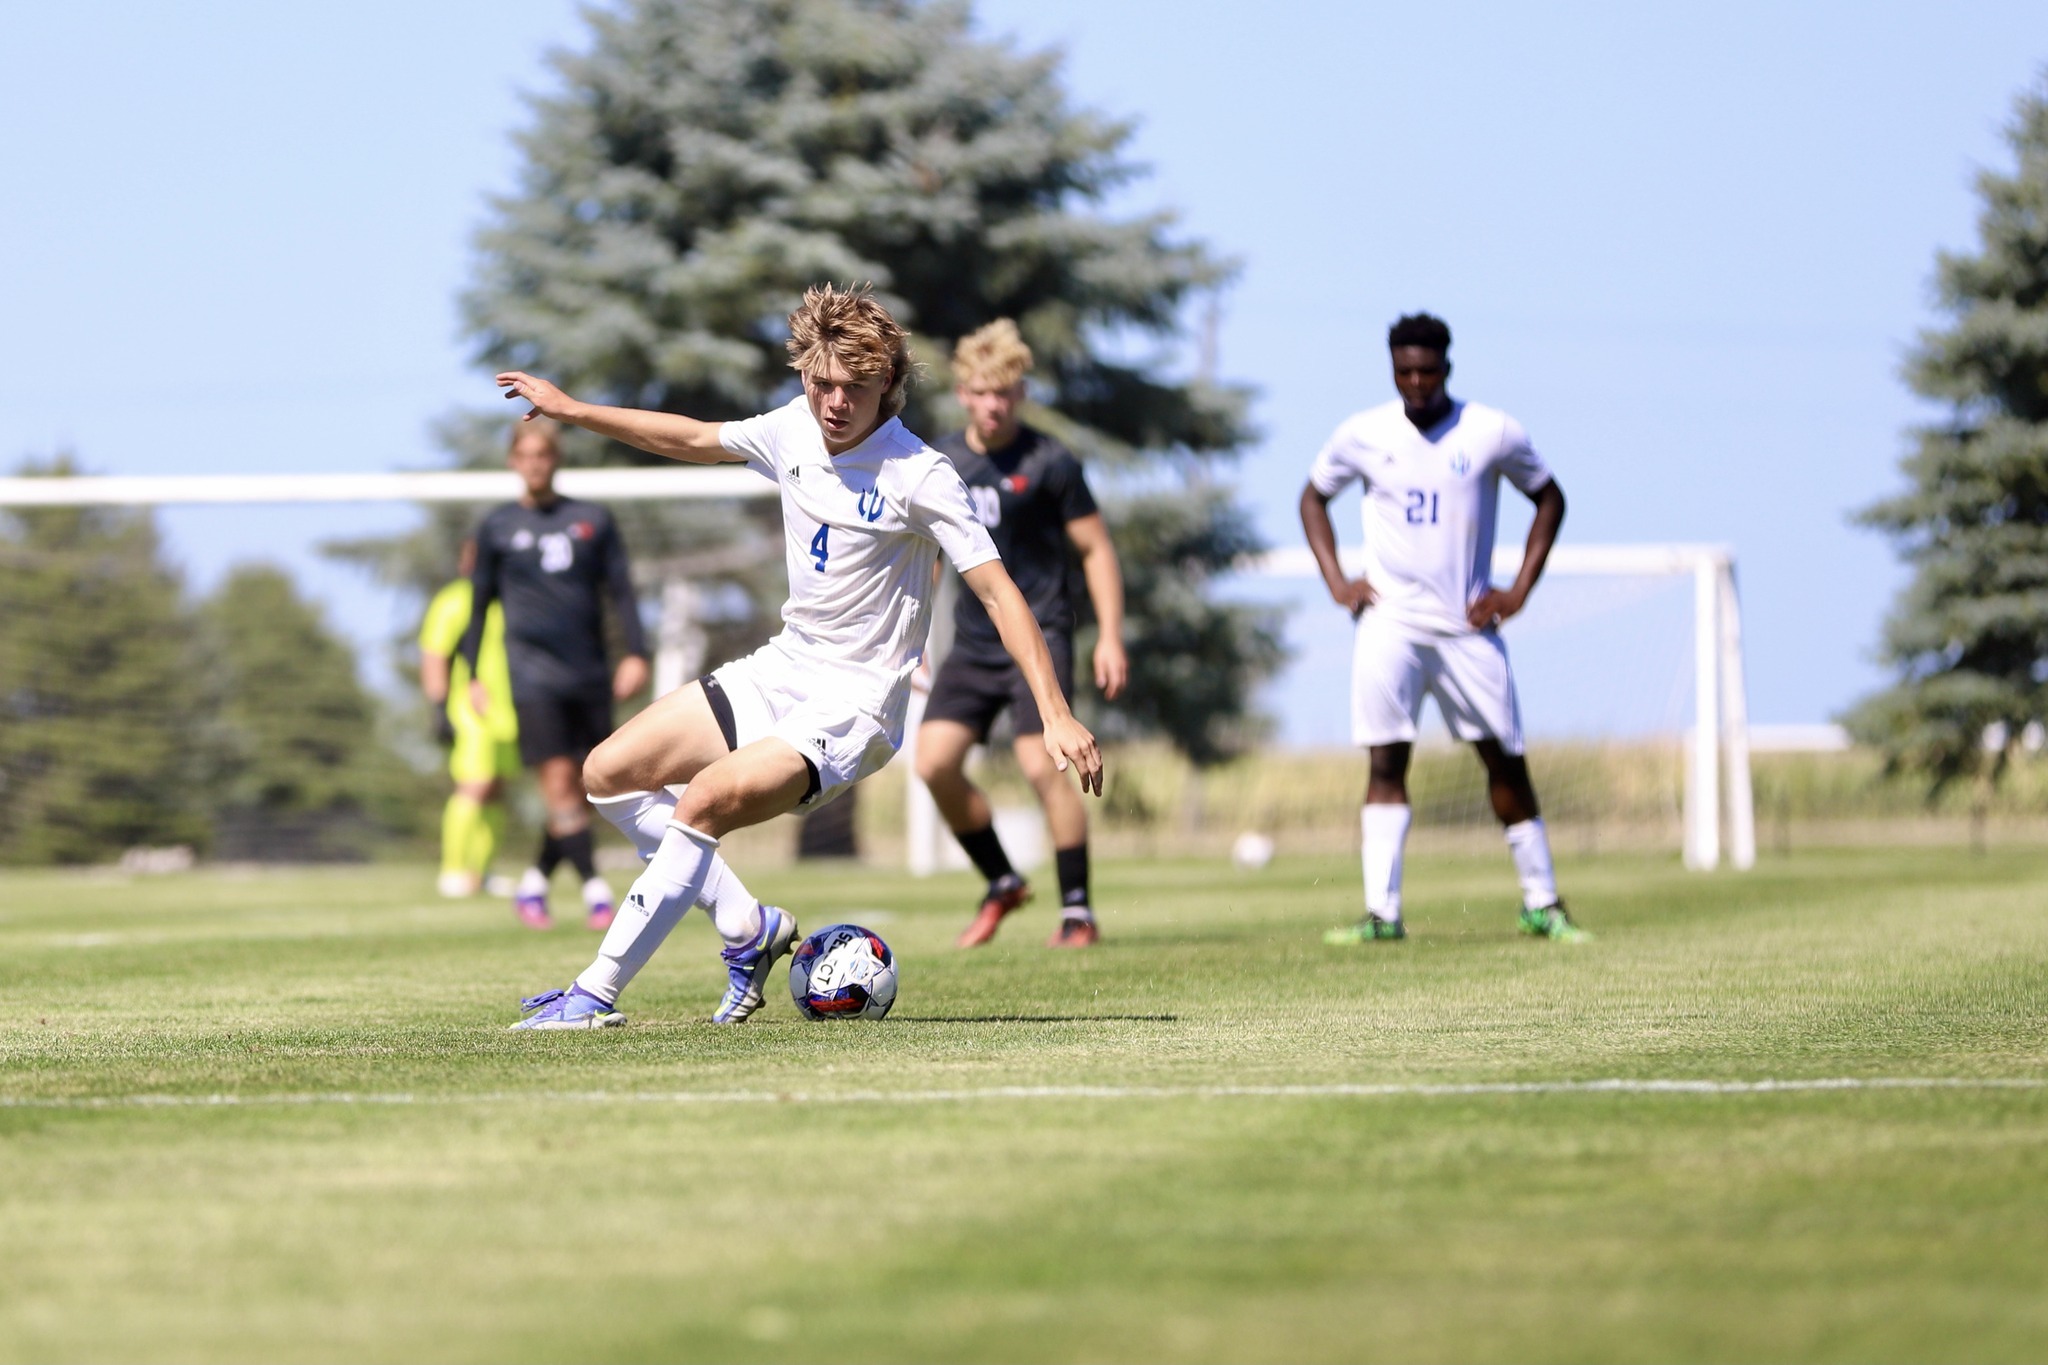 Tritons square off with ranked Reivers